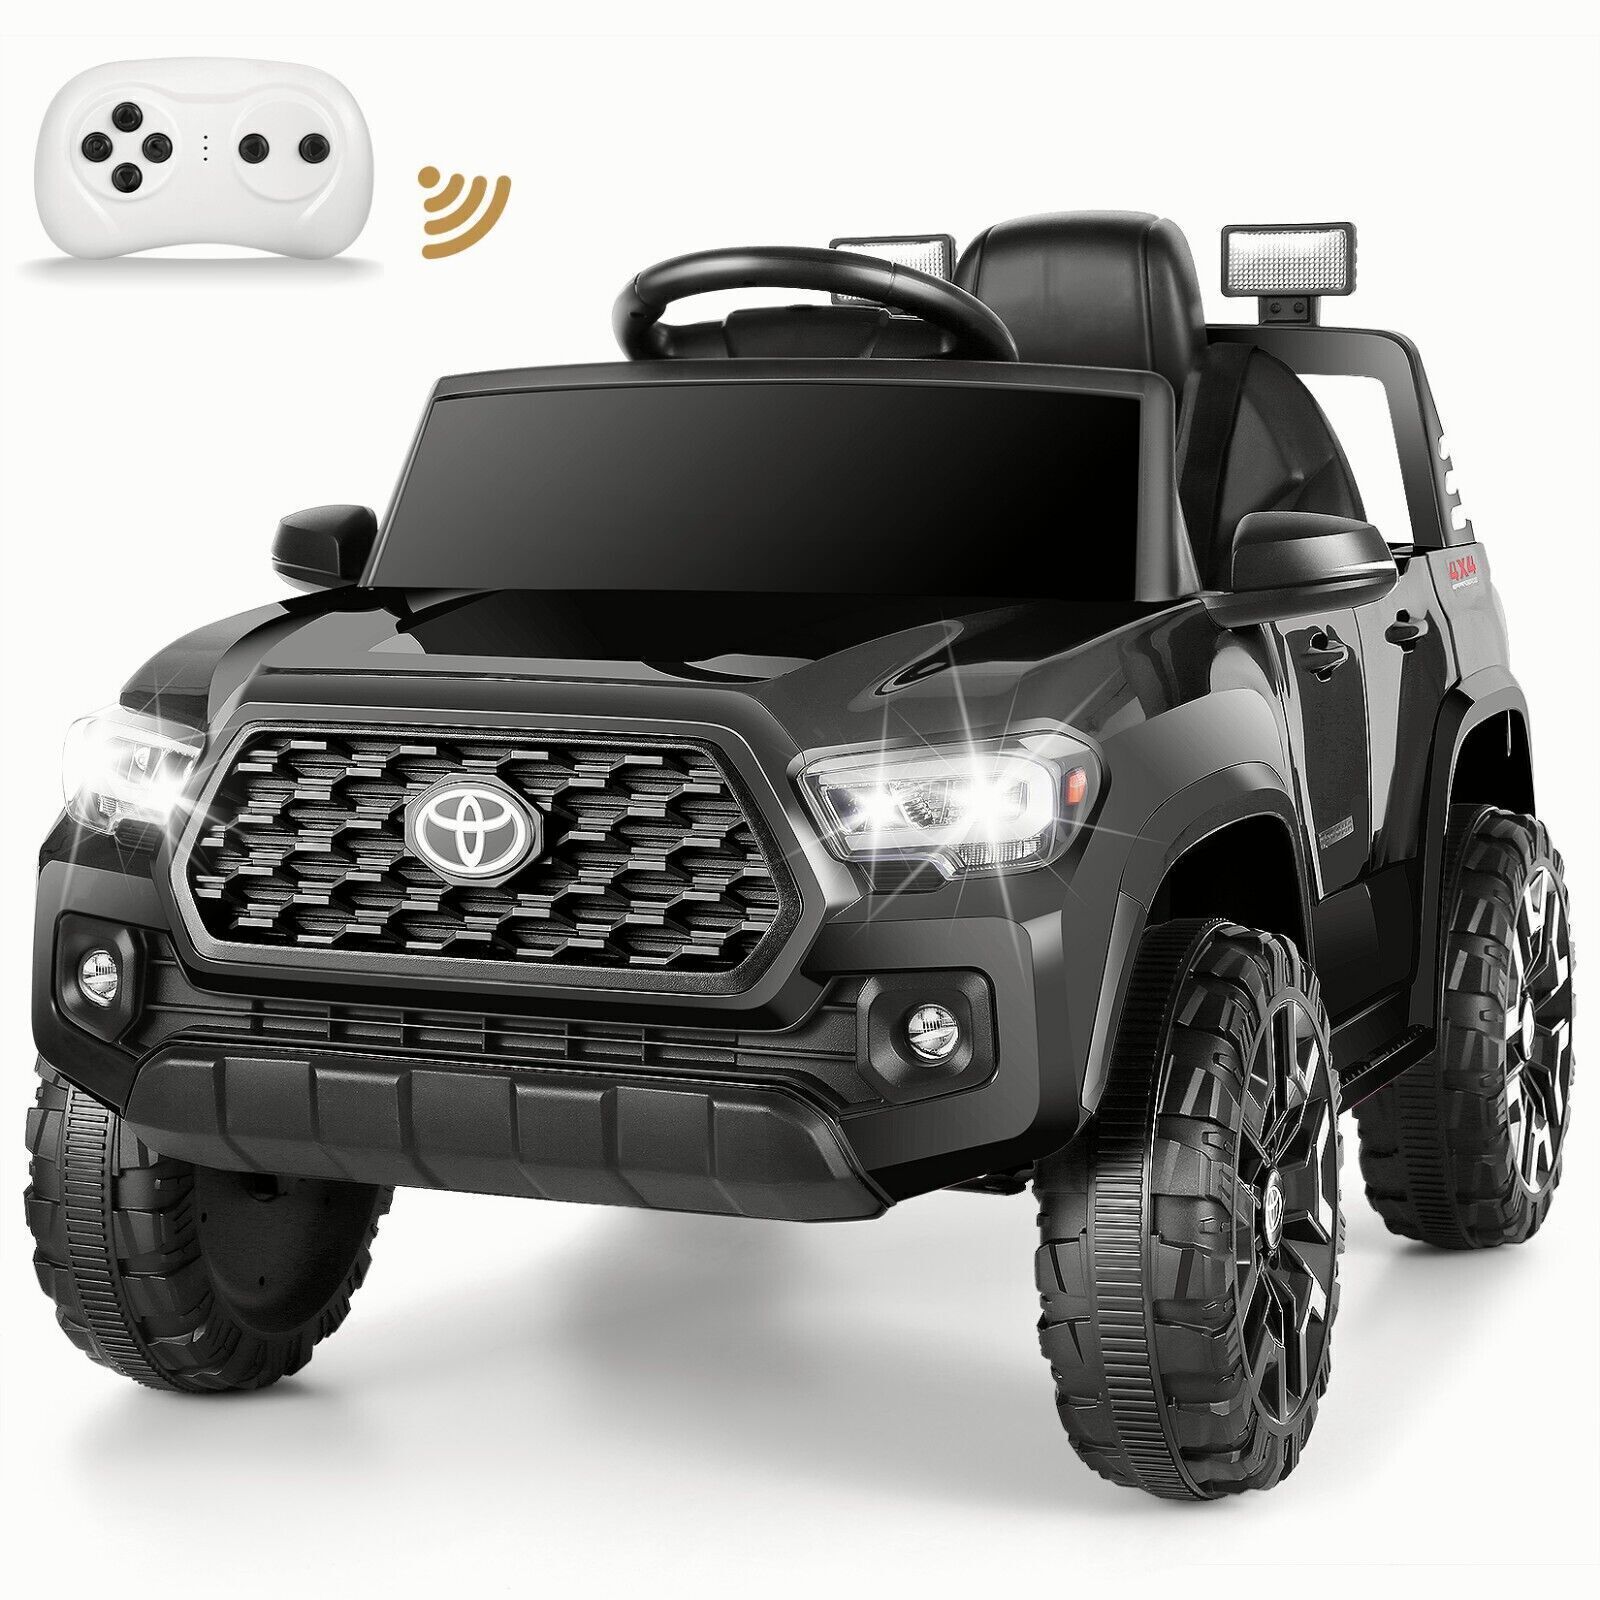 12V 7AH Electric Cars for Kids Licensed Toyota Tacoma Electric Vehicle w/ Remote